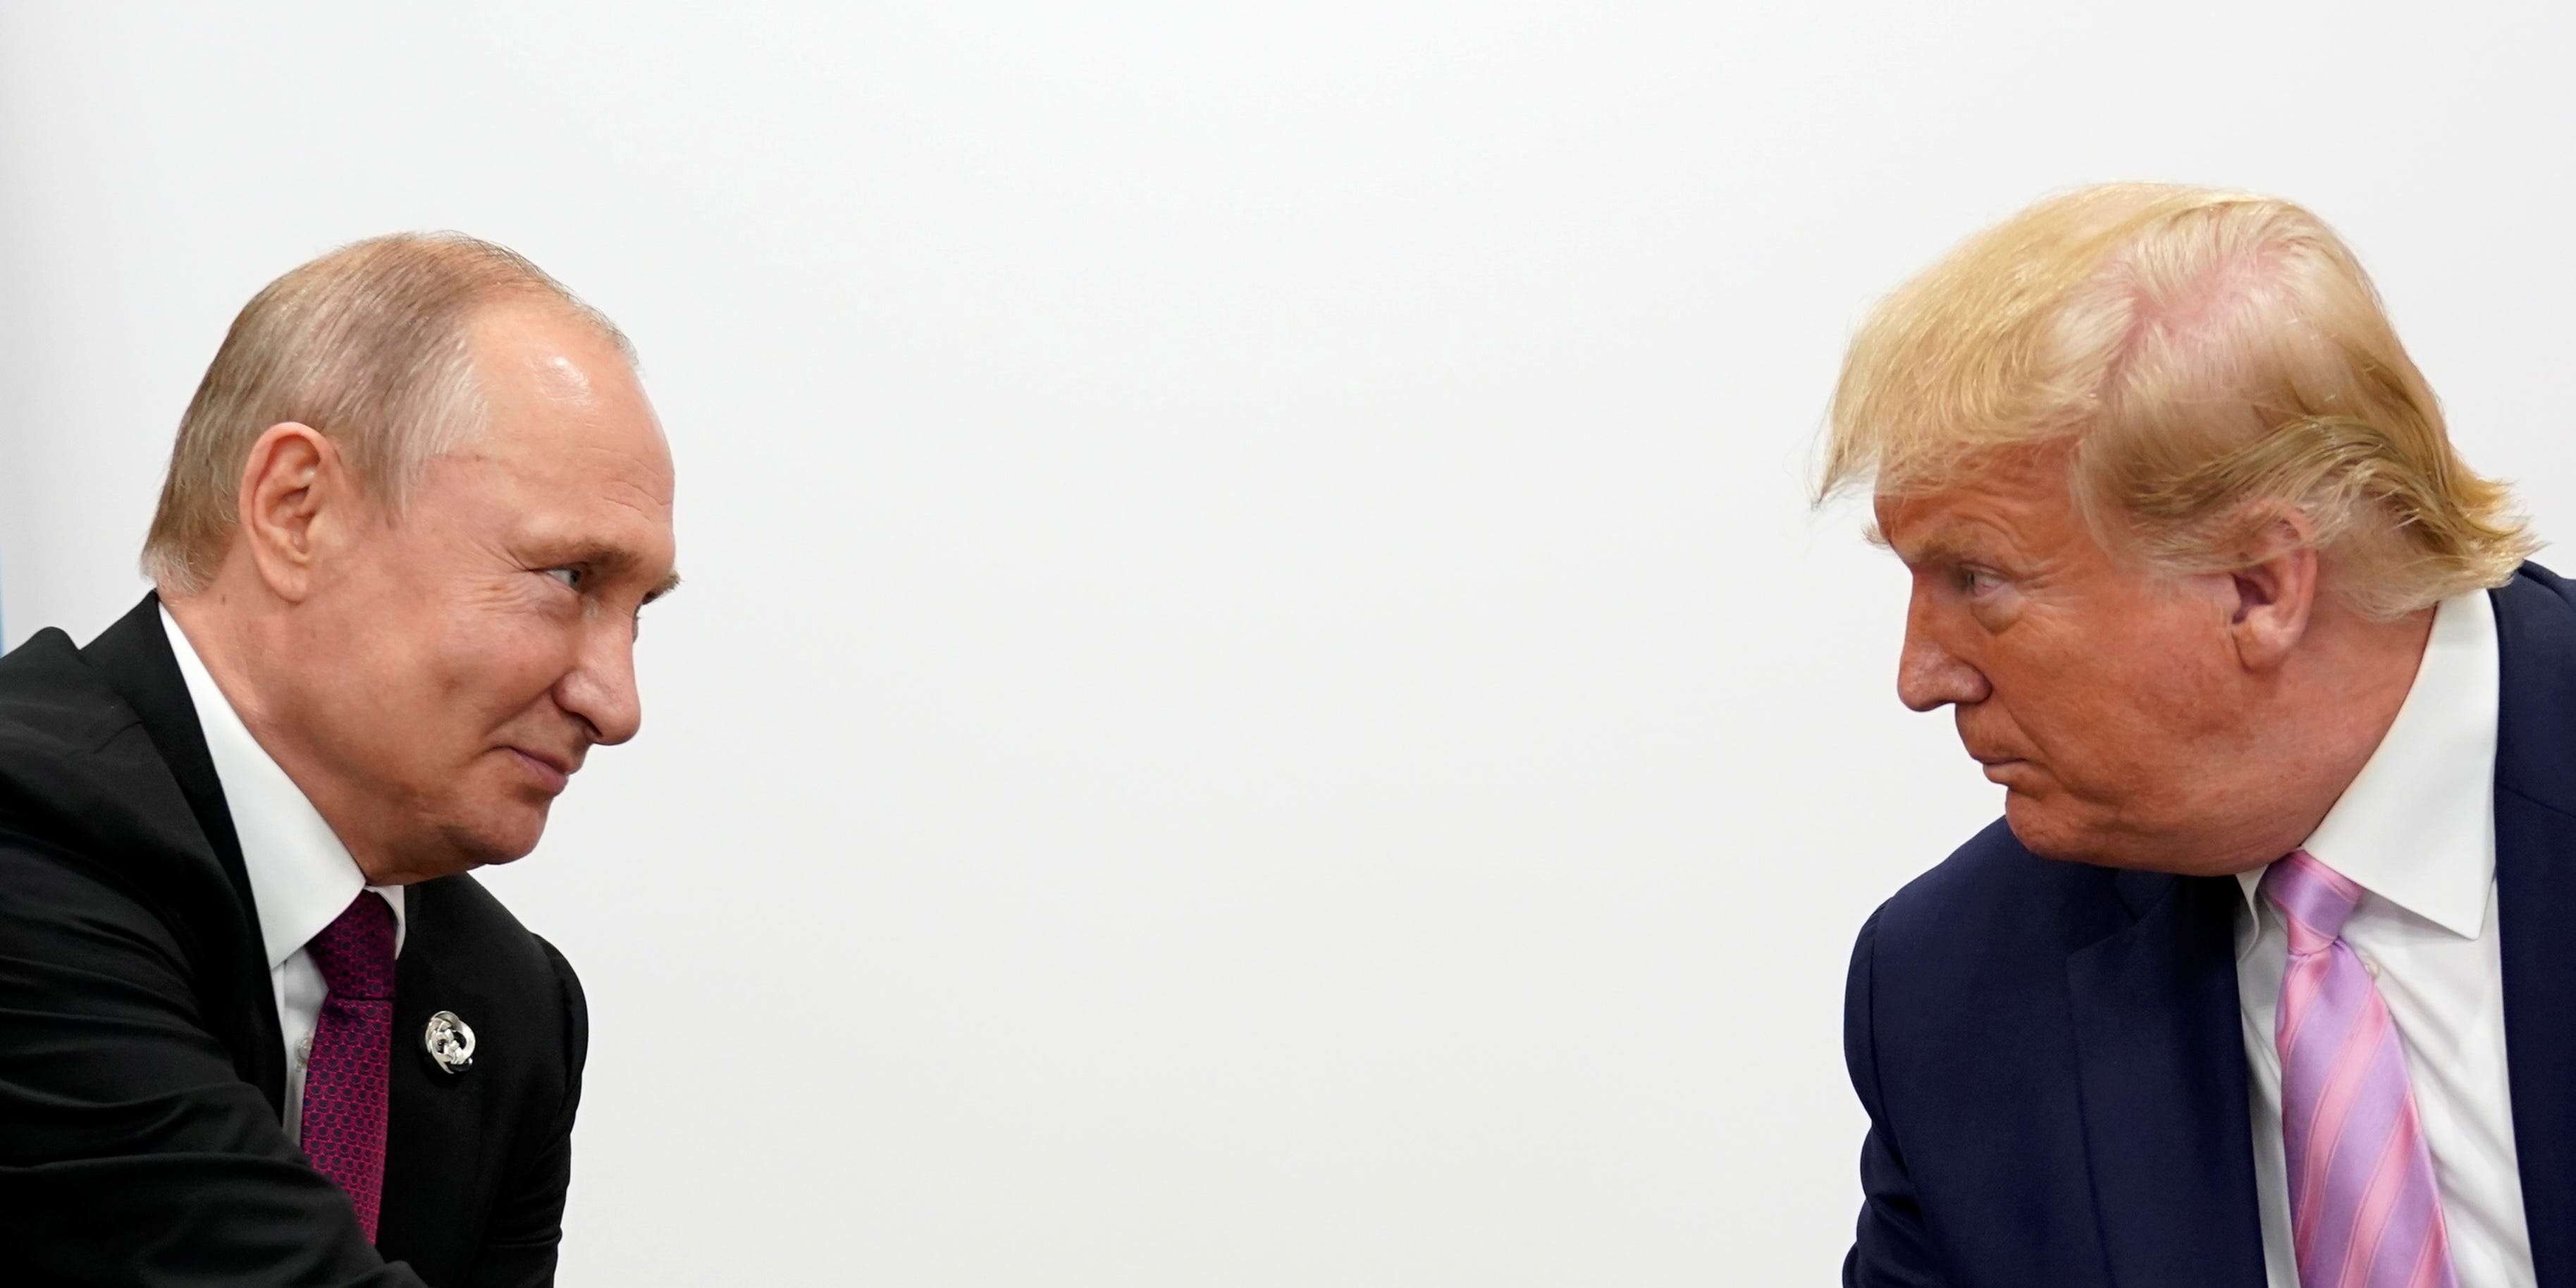 Evidence of Russia's 'likely hold' over Trump was covered up by the UK government, according to a former British spy